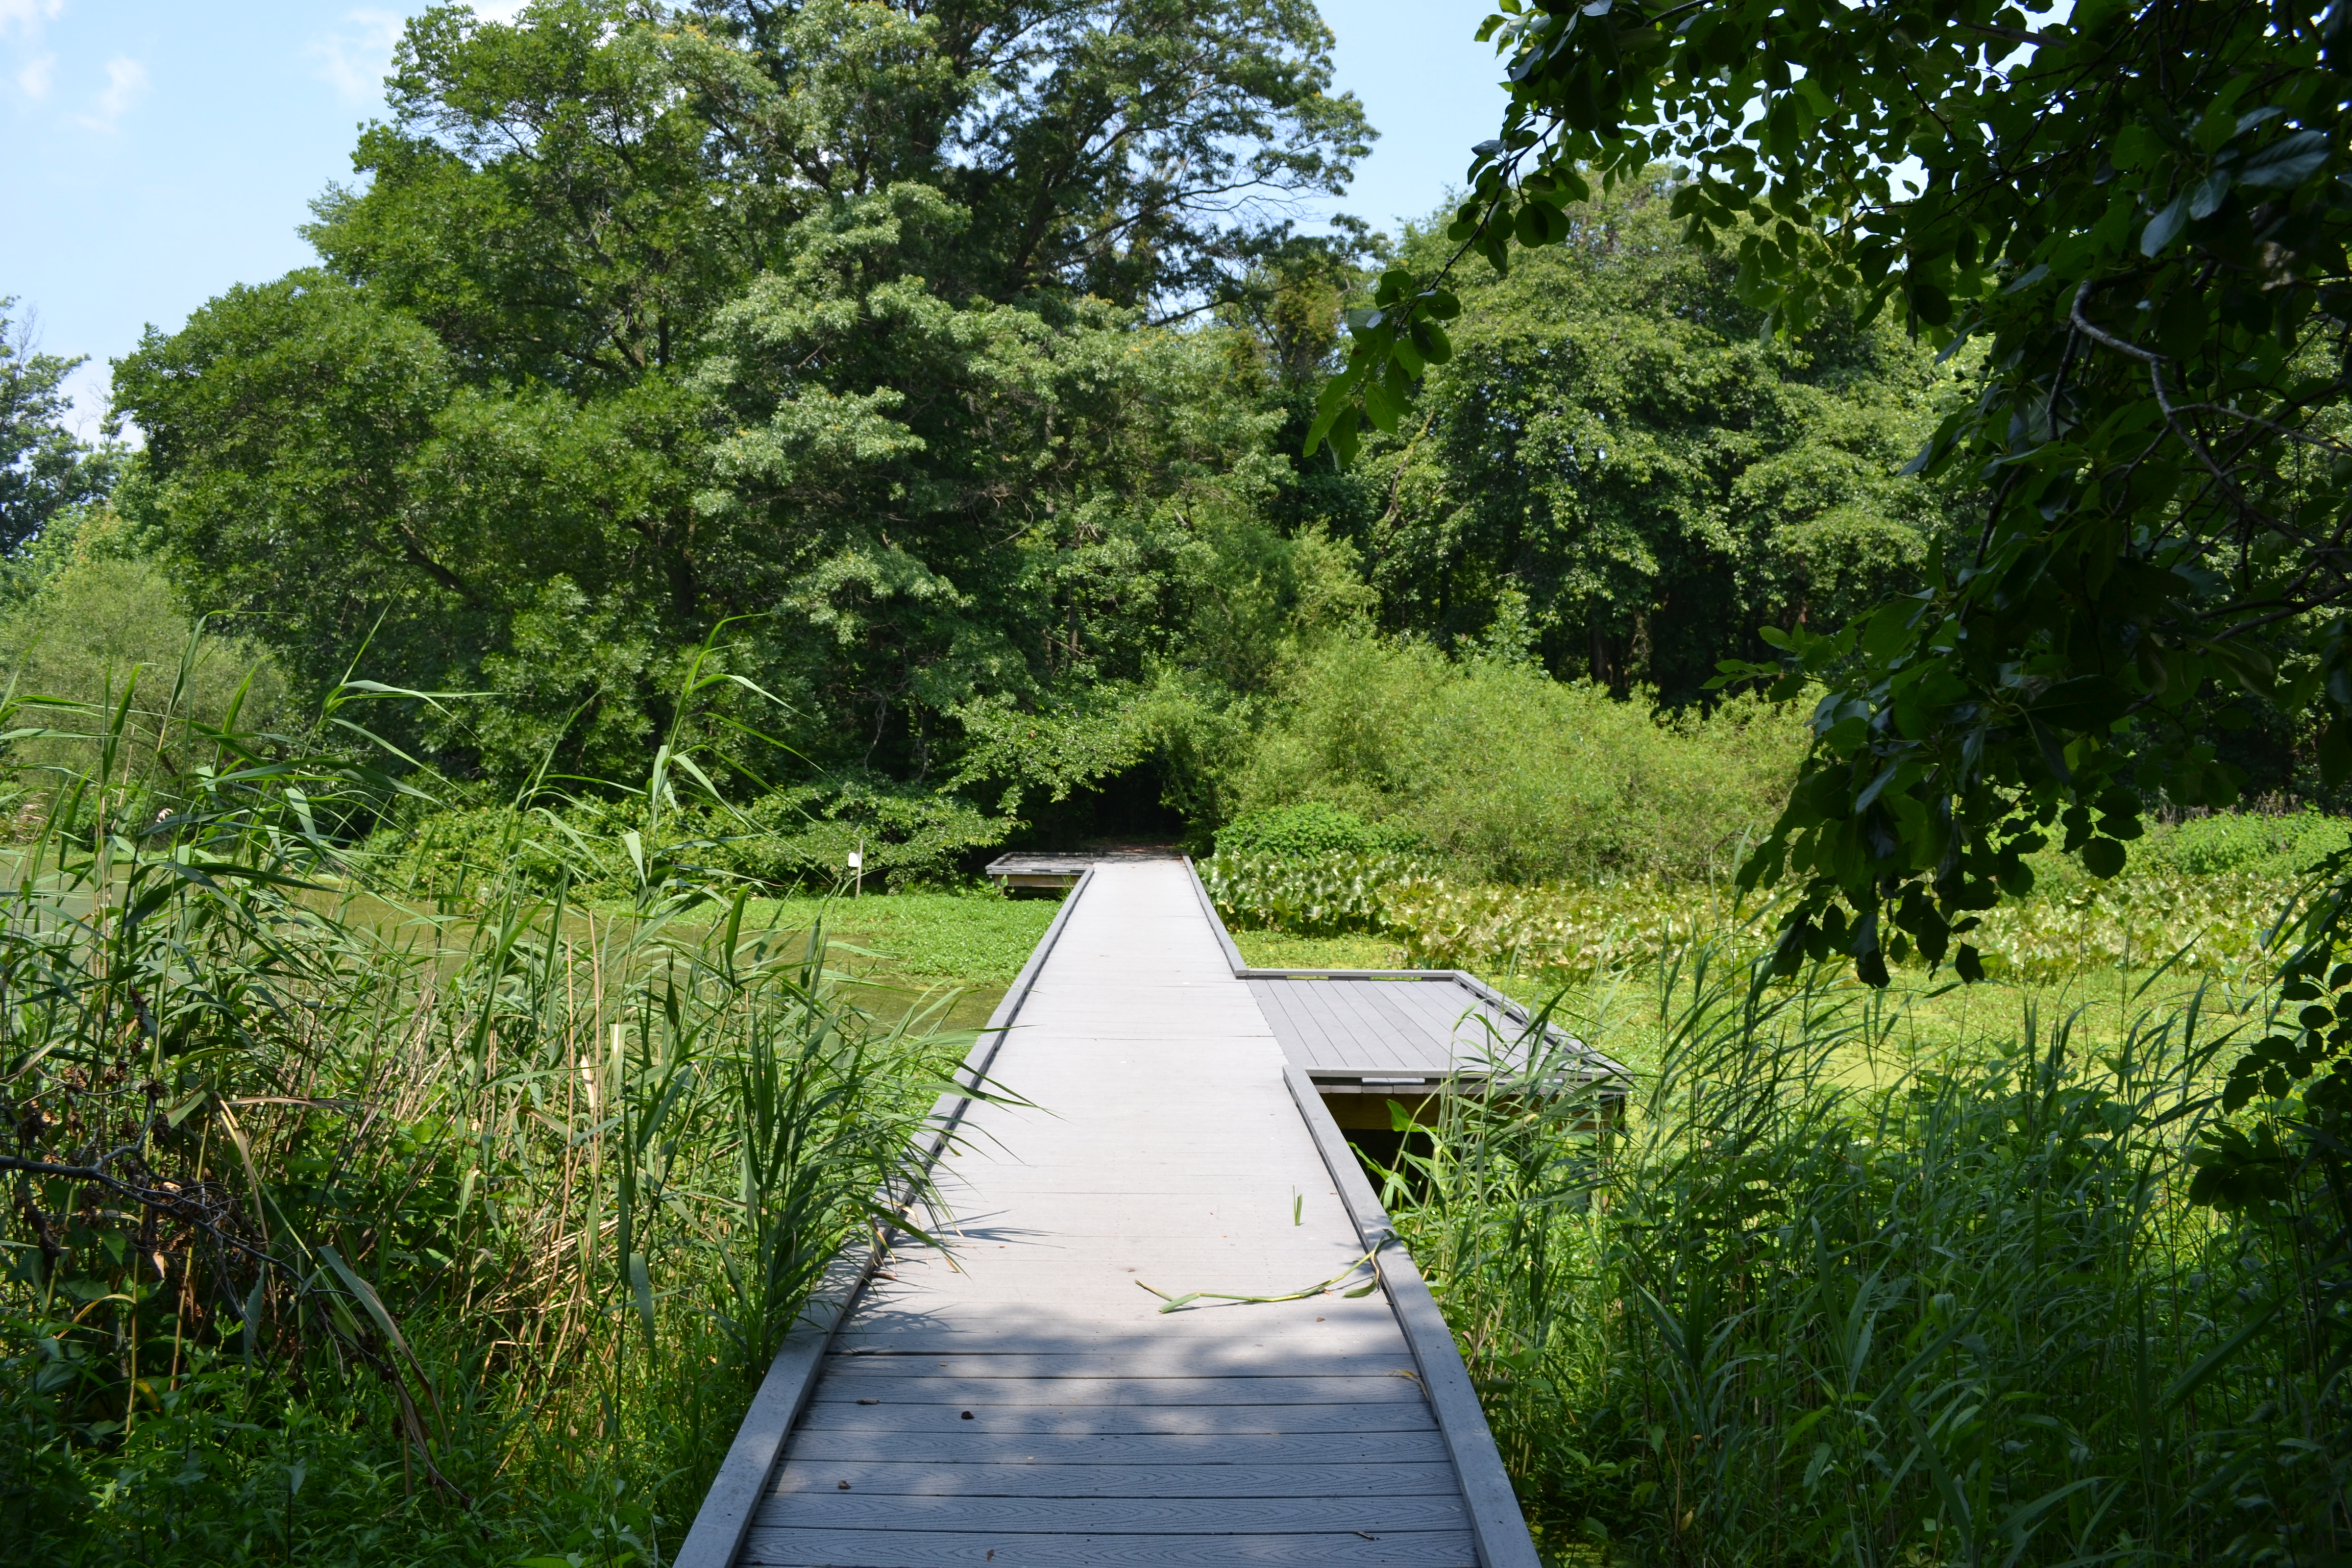 This boardwalk is handicap accessible and can be reached from the visitors center by wheelchair